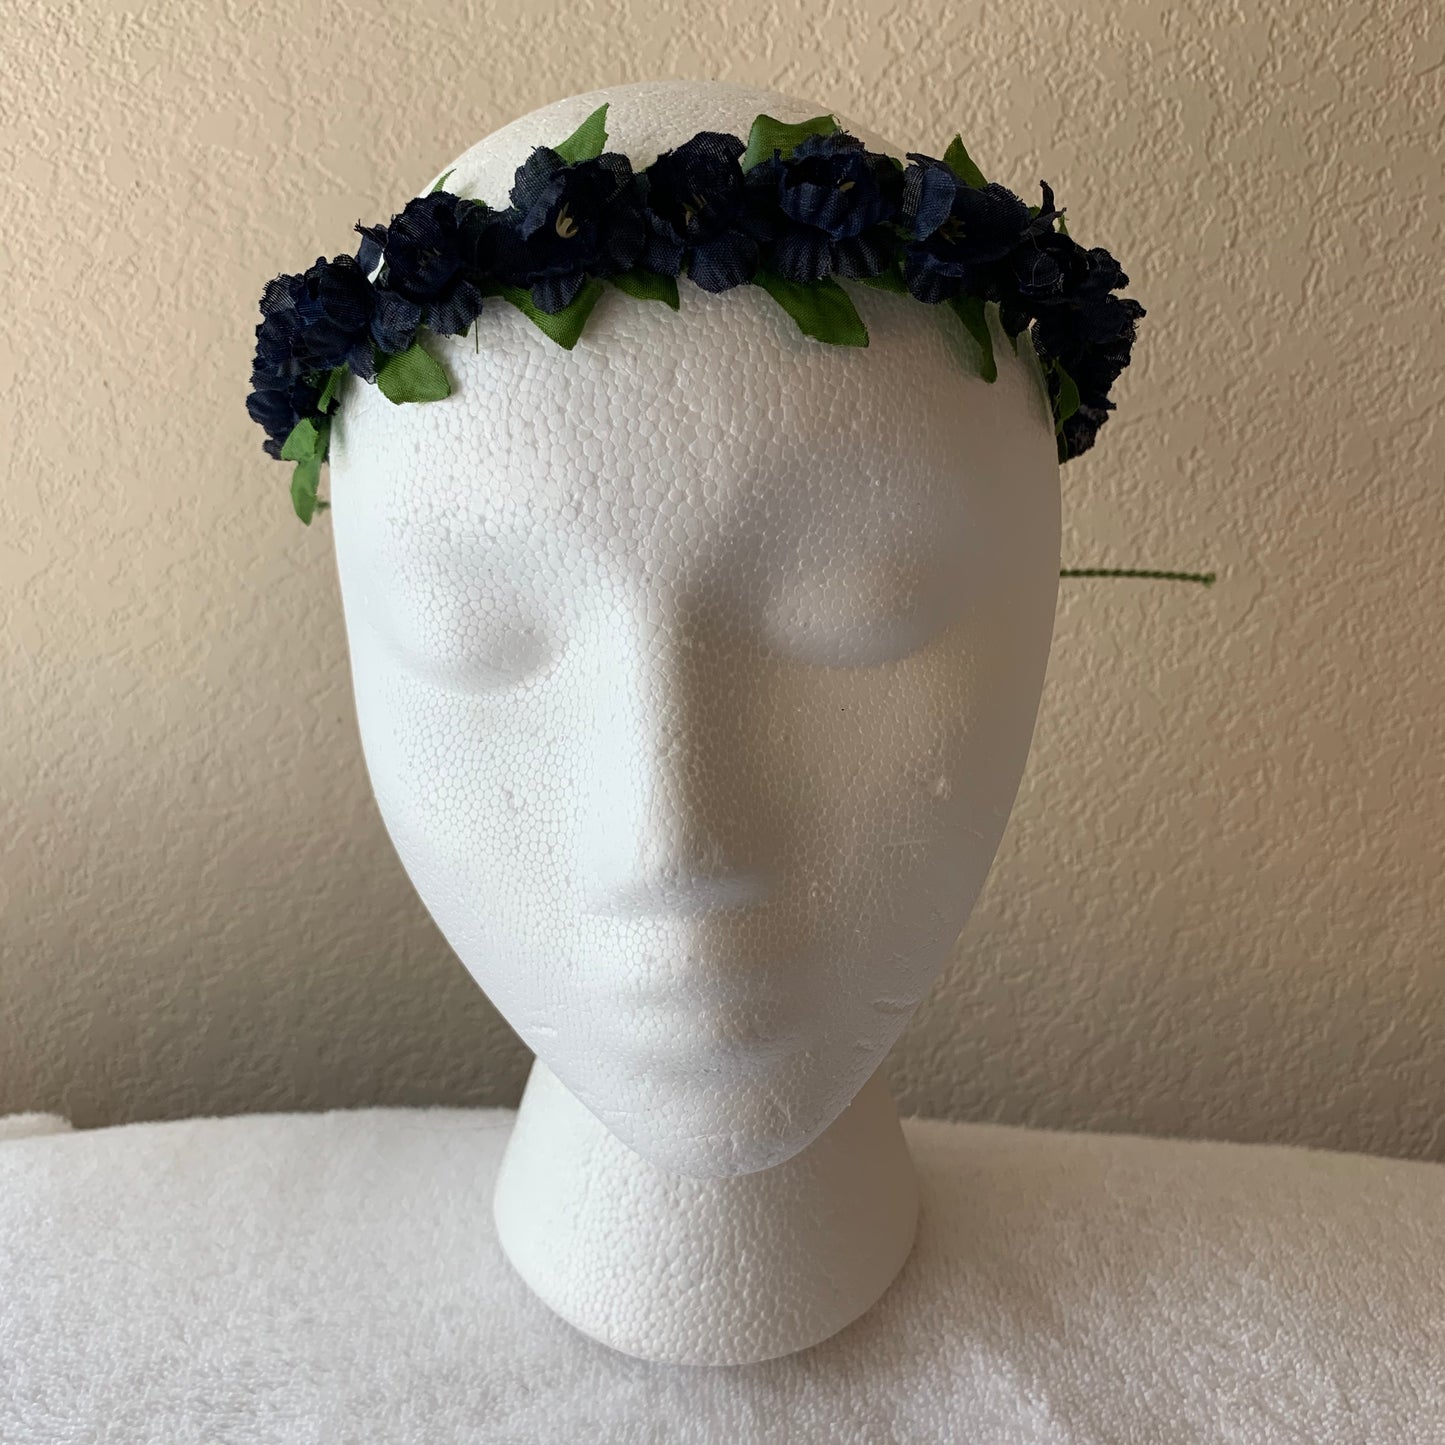 Extra Small Wreath - All Navy Blue Flowers